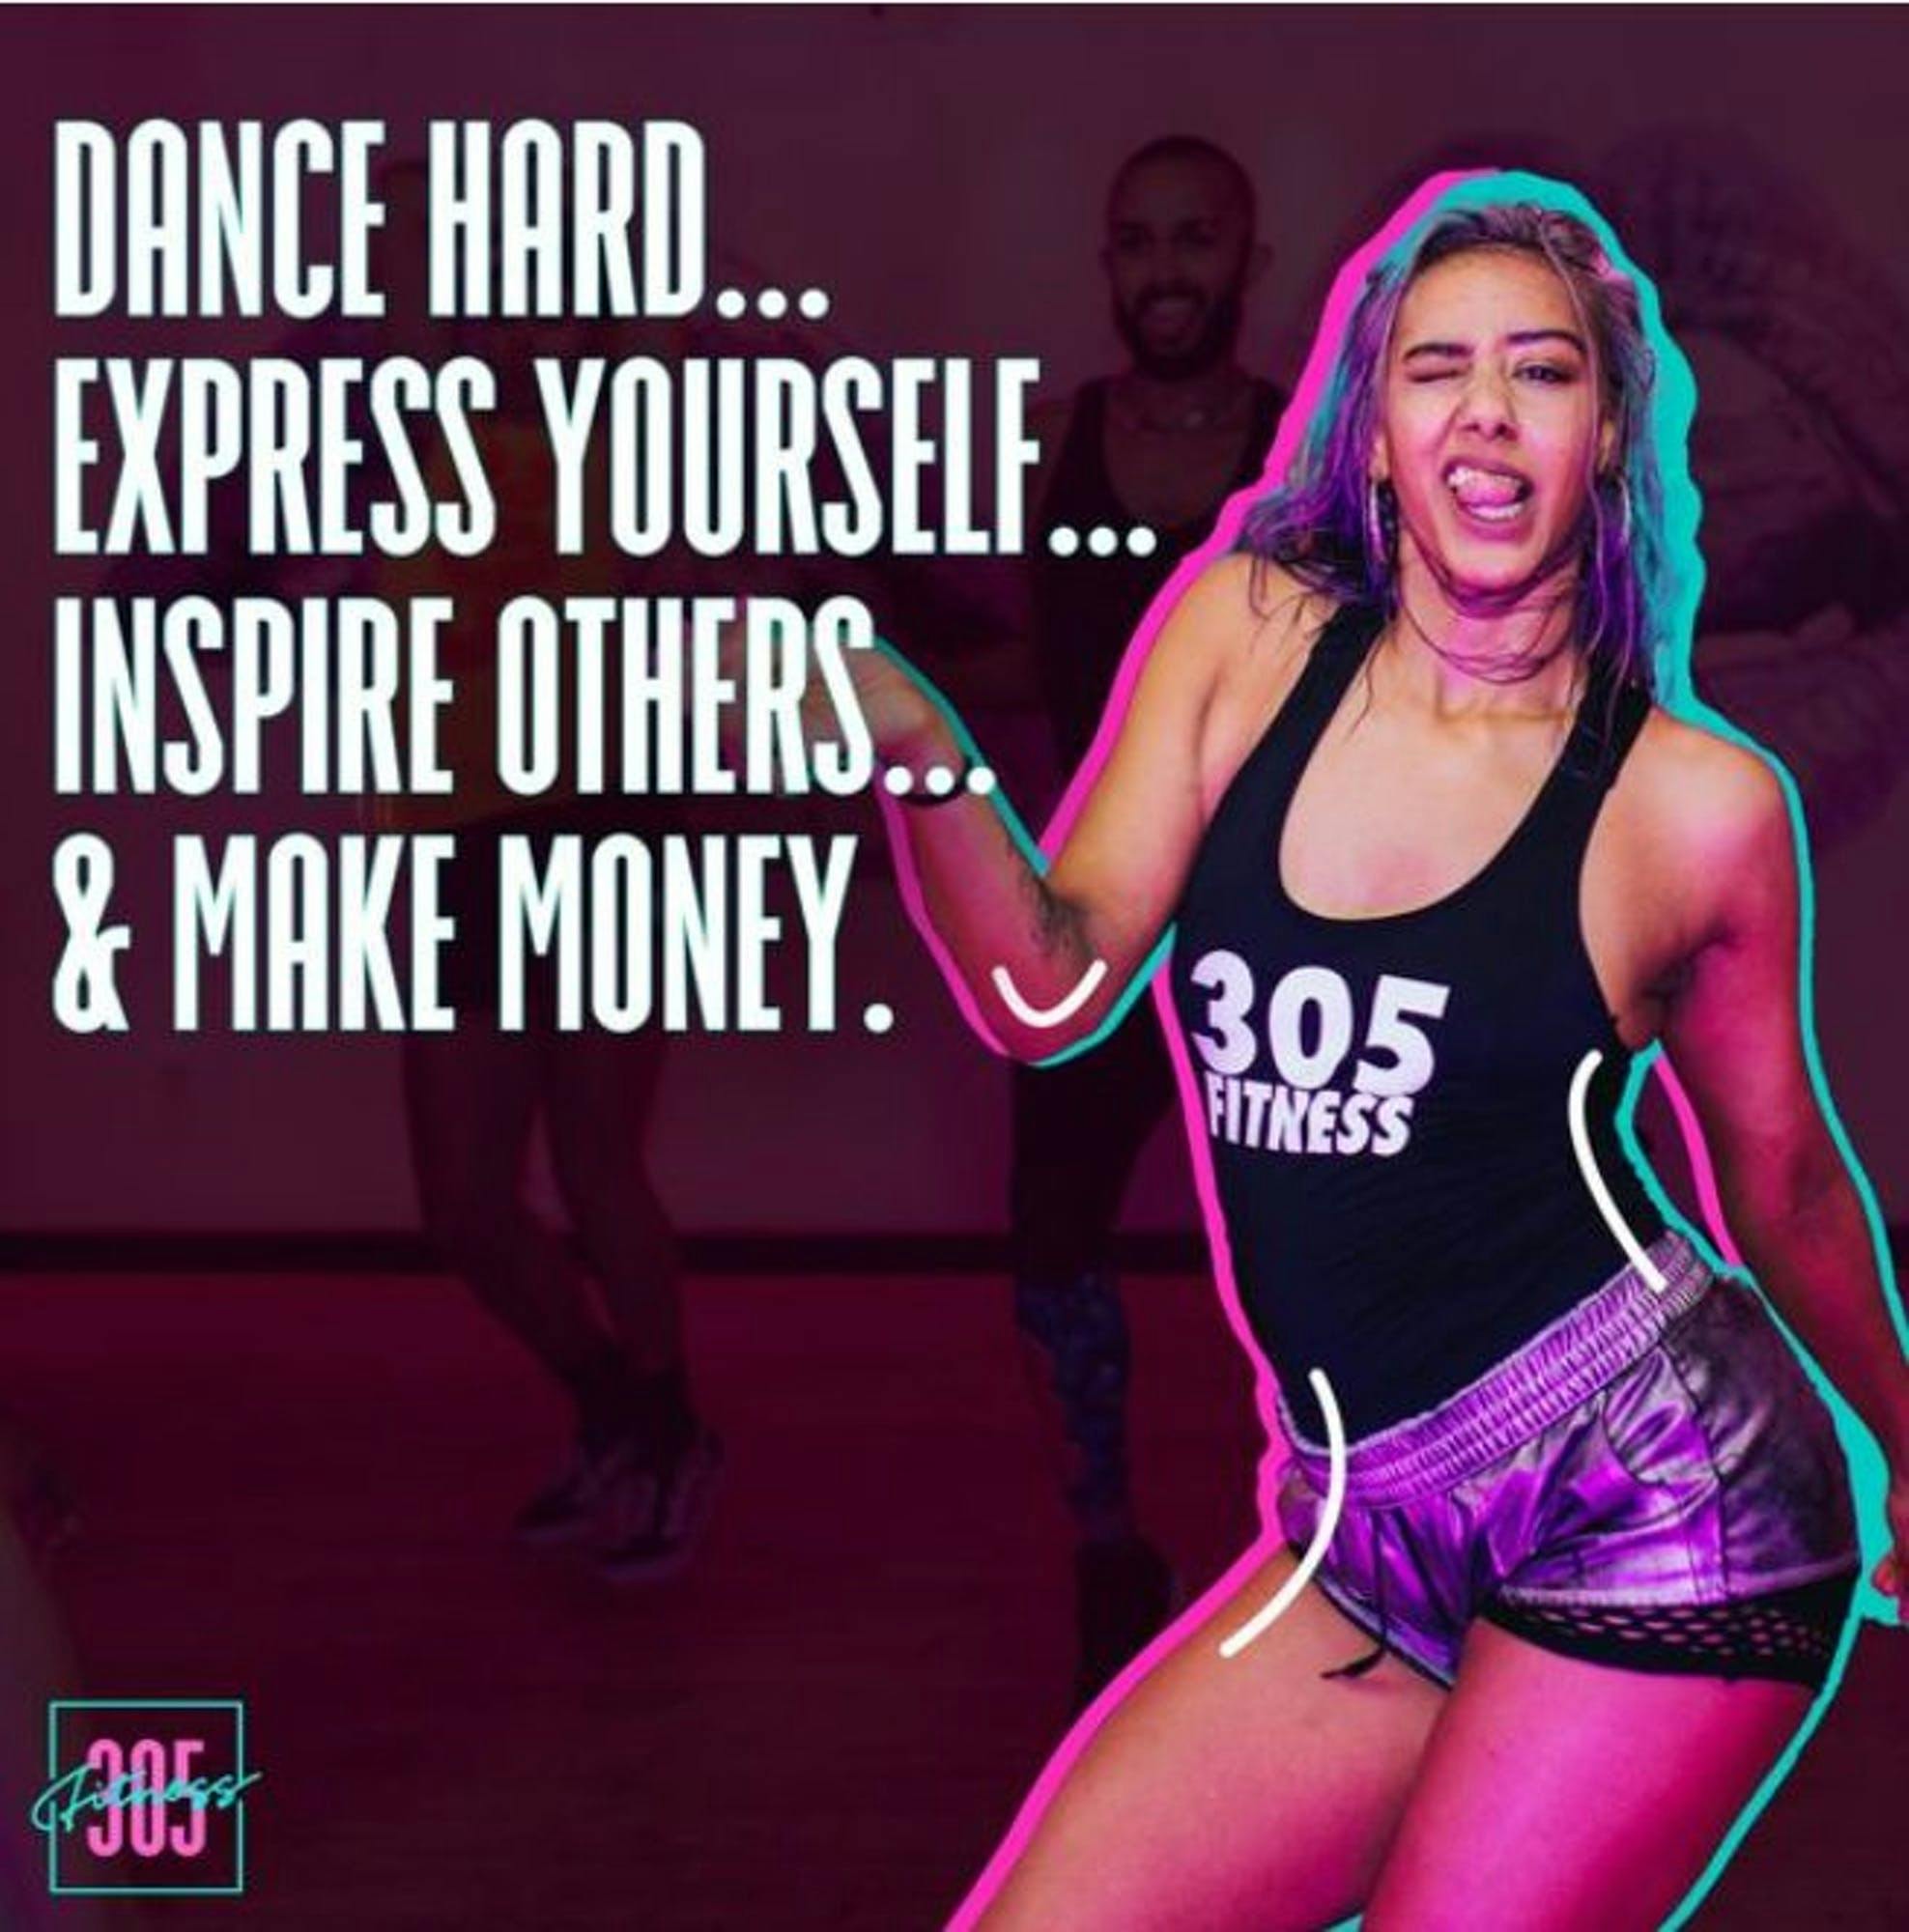 Image text: Dance Hard ... Express Yourself ... Inspire others ... & Make Money.